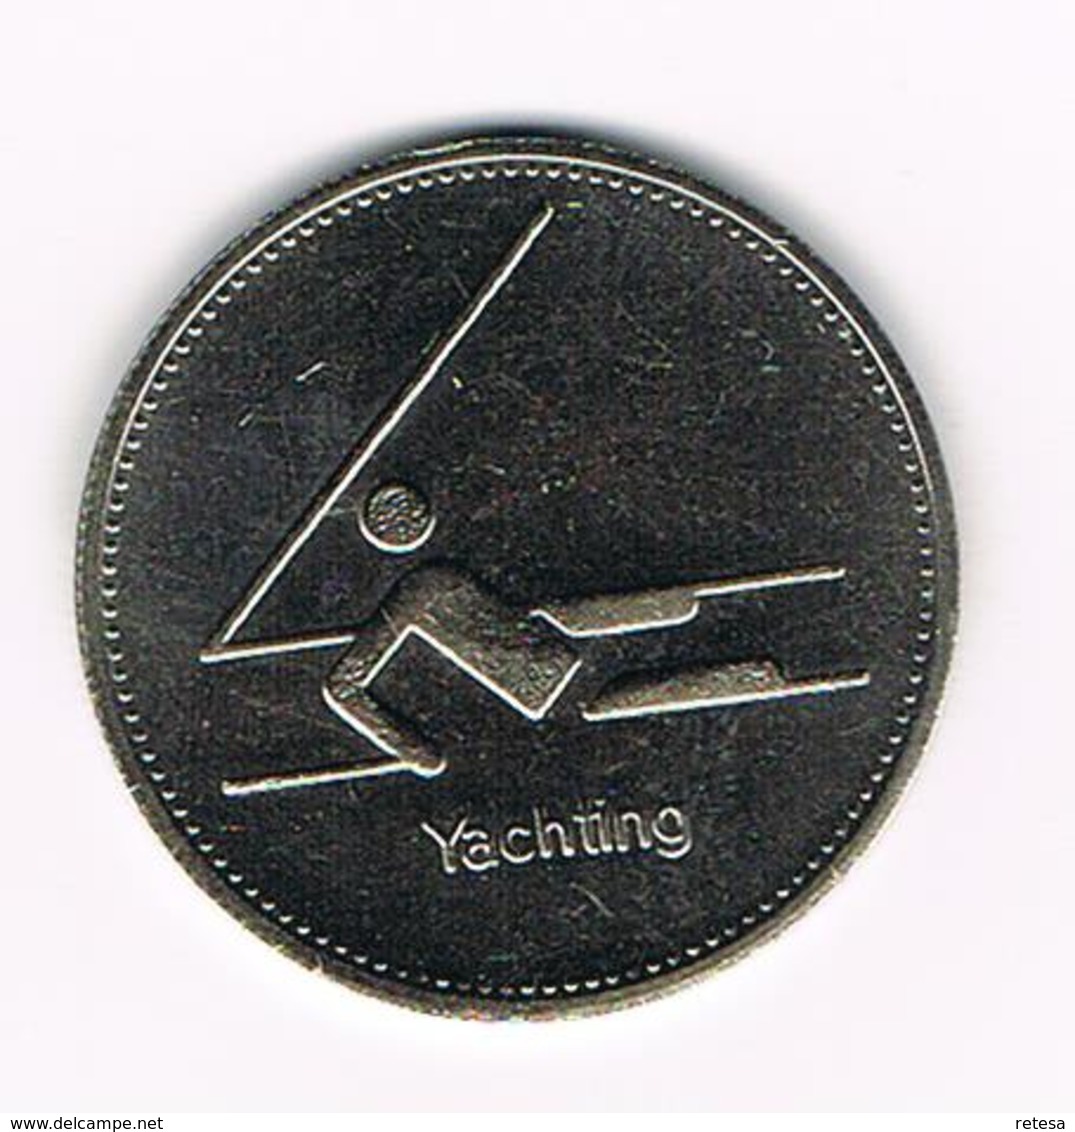 &  PENNING OLYMPIC TRUST OF CANADA  YACHTING 1980 - Souvenirmunten (elongated Coins)